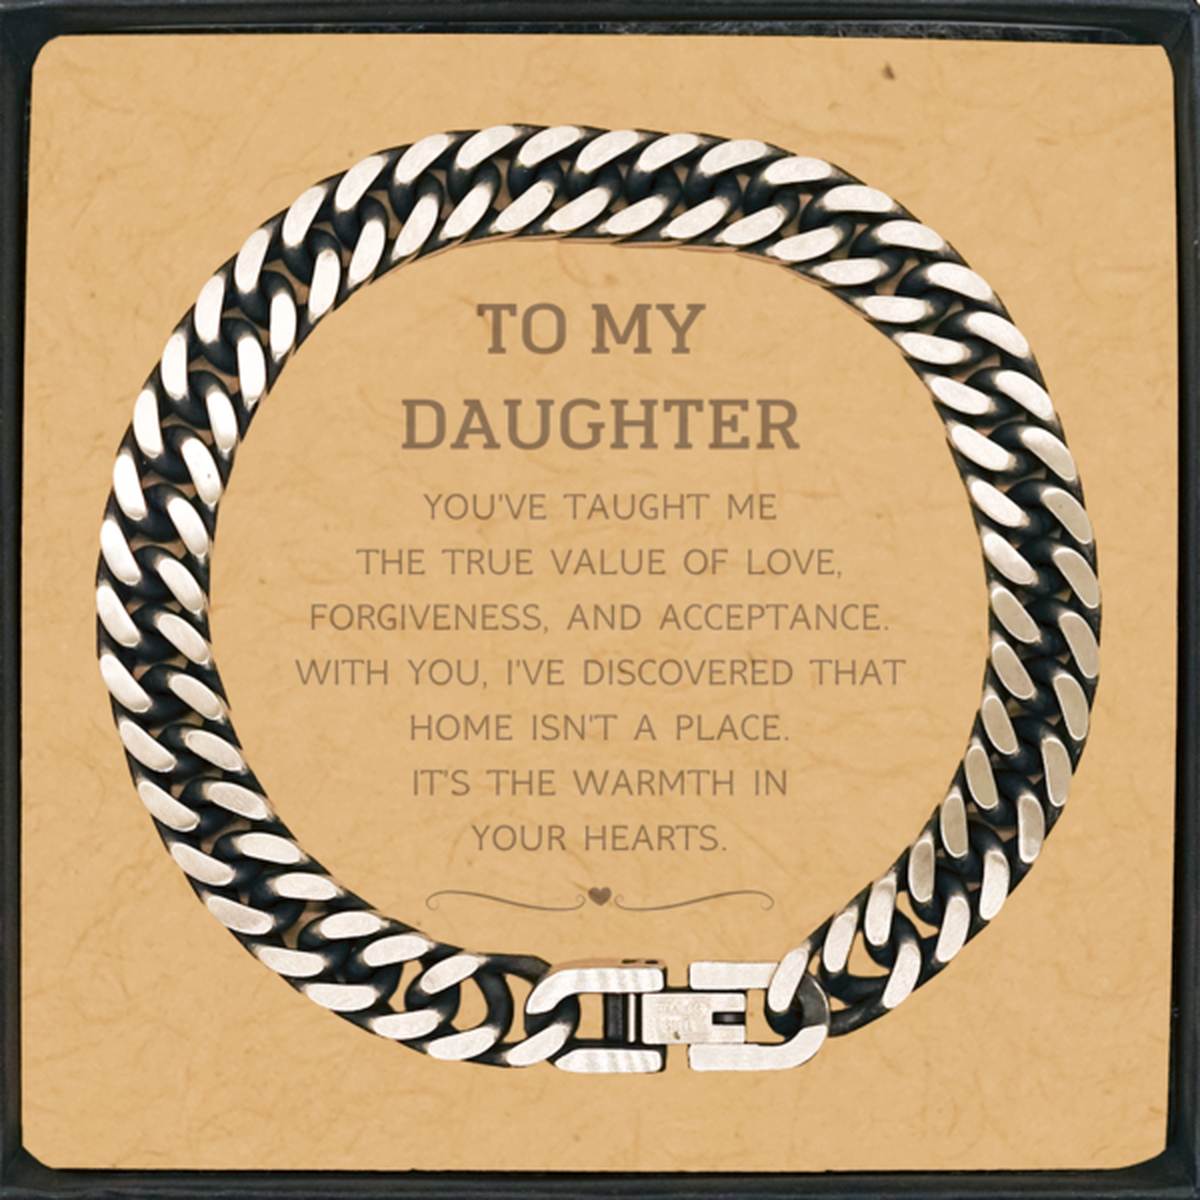 To My Daughter Gifts, You've taught me the true value of love, Thank You Gifts For Daughter, Birthday Cuban Link Chain Bracelet For Daughter